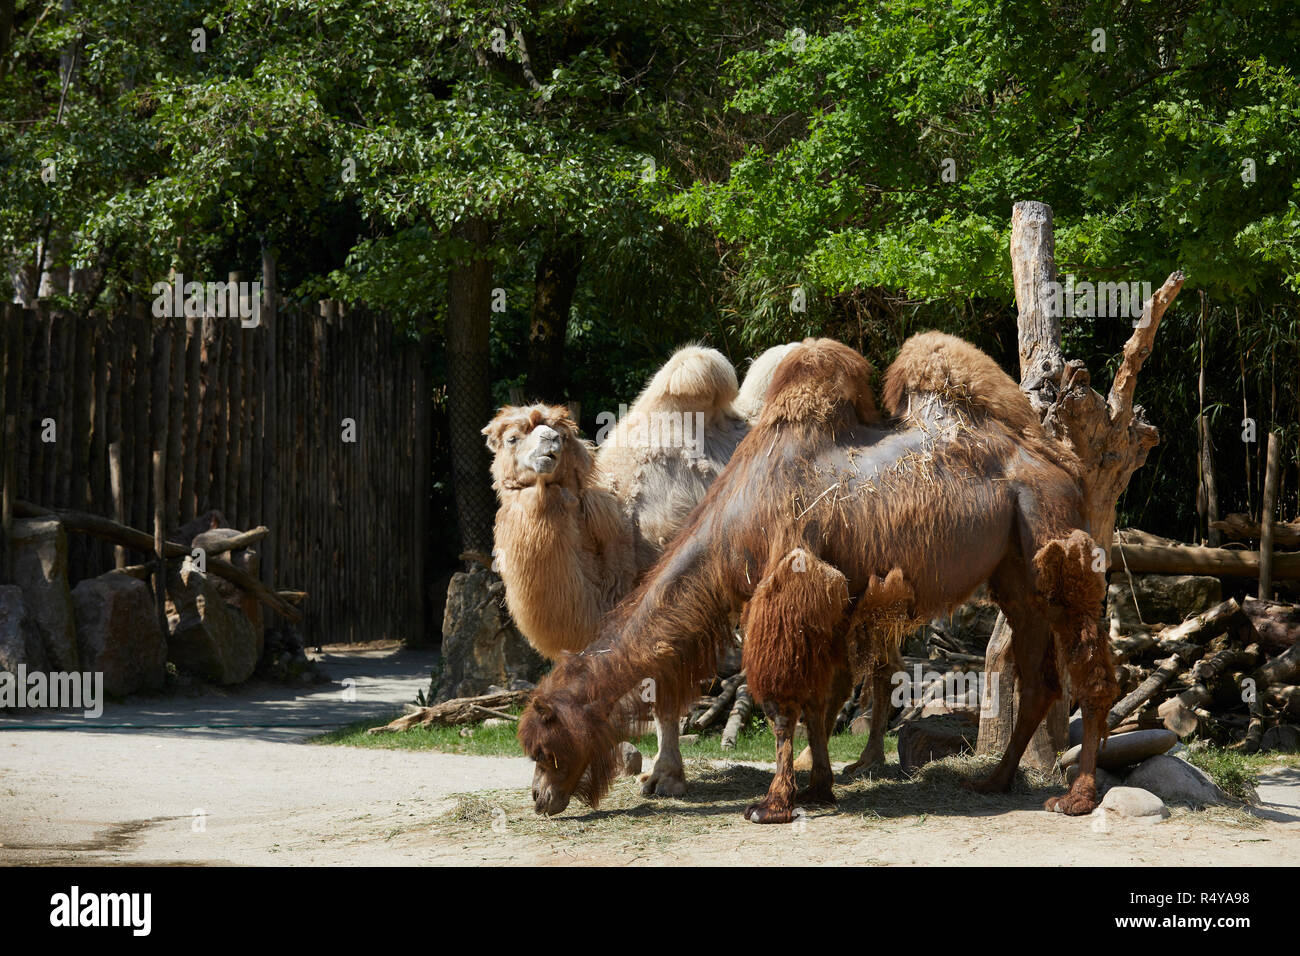 Bactrian Camels in a zoo, Italy Stock Photo